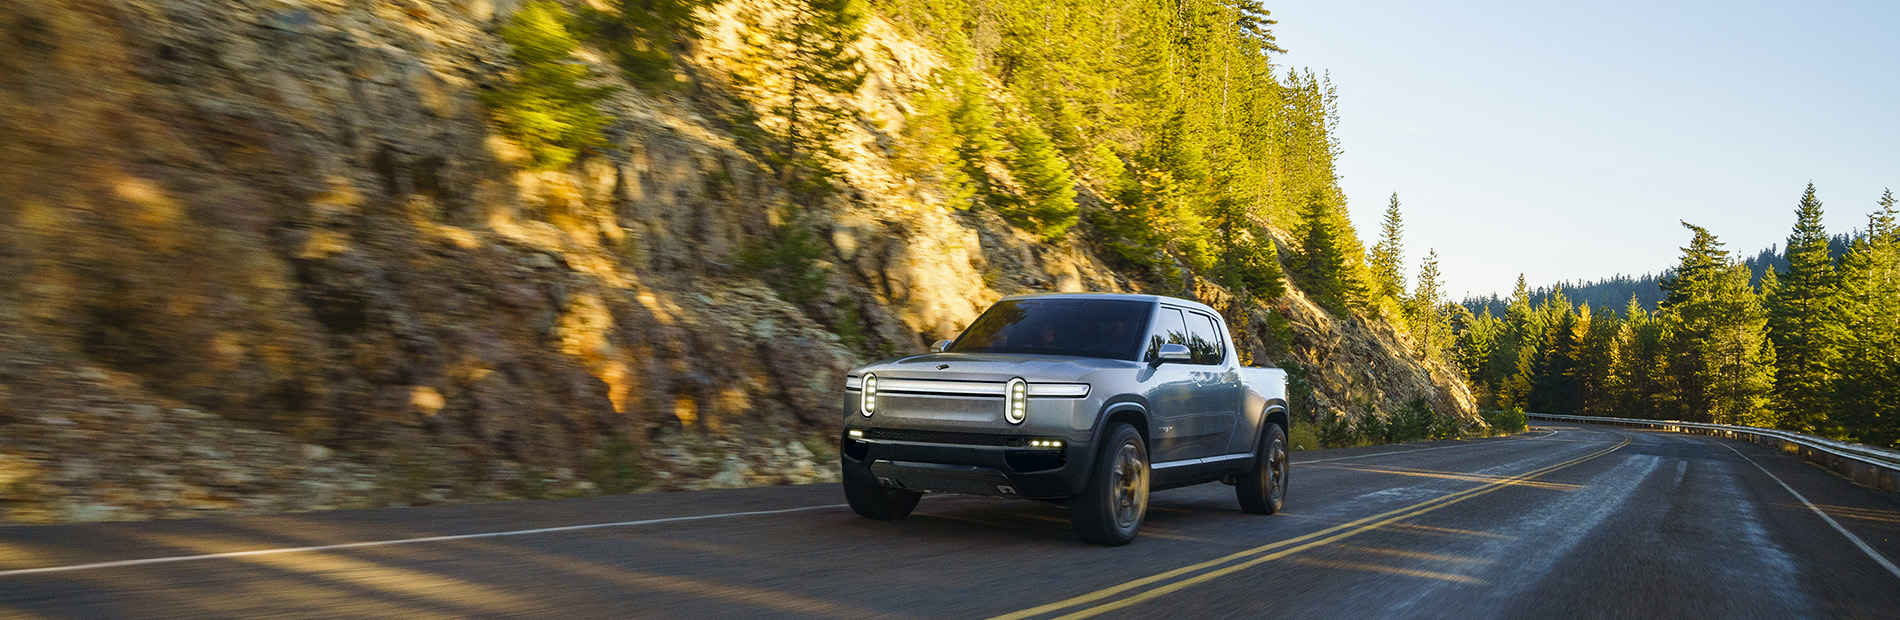 Rivian Automotive all-electric pickup R1T driving down a wooded road.